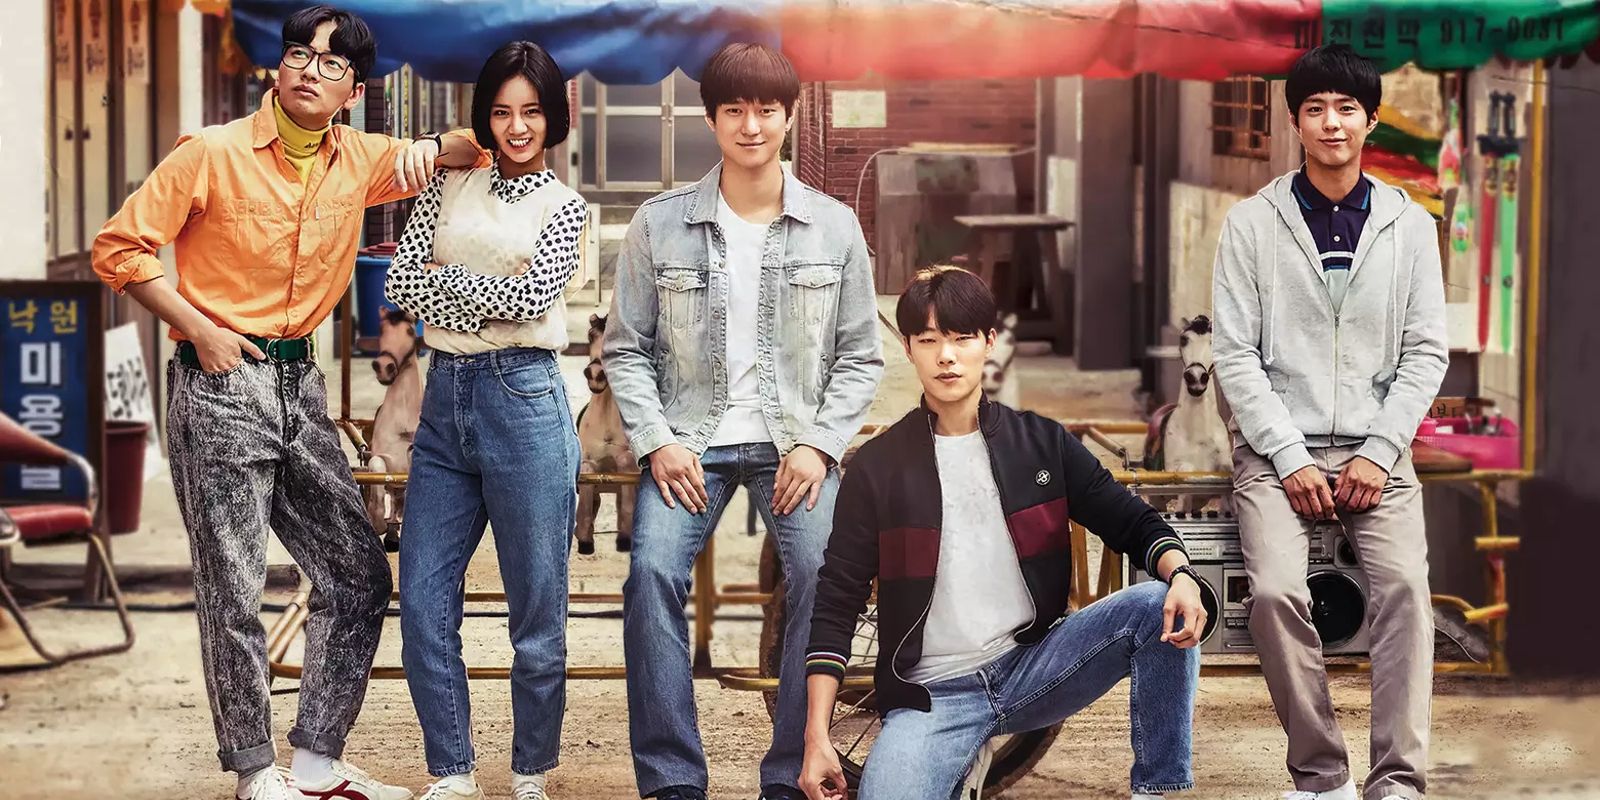 The characters of Reply 1988 poses for a photograph.